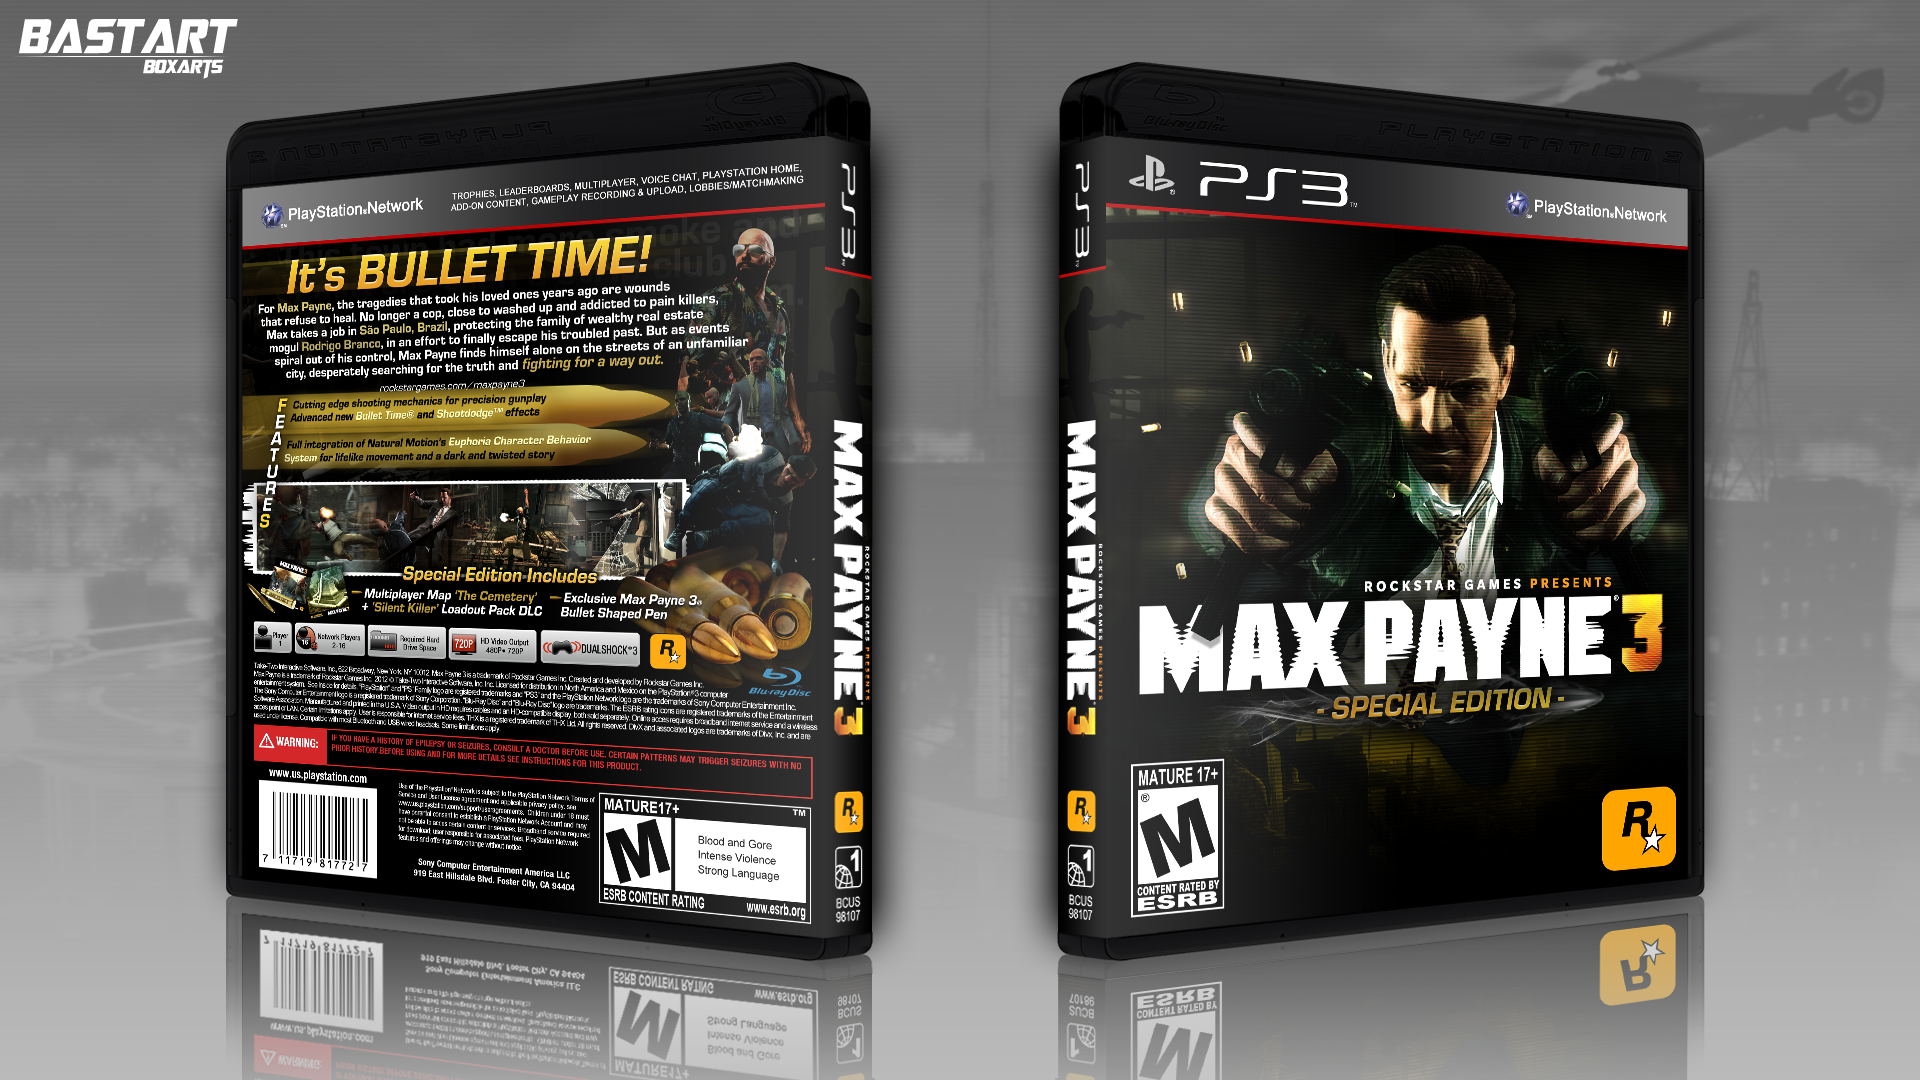 Viewing full size Max Payne 3: Special Edition box cover.